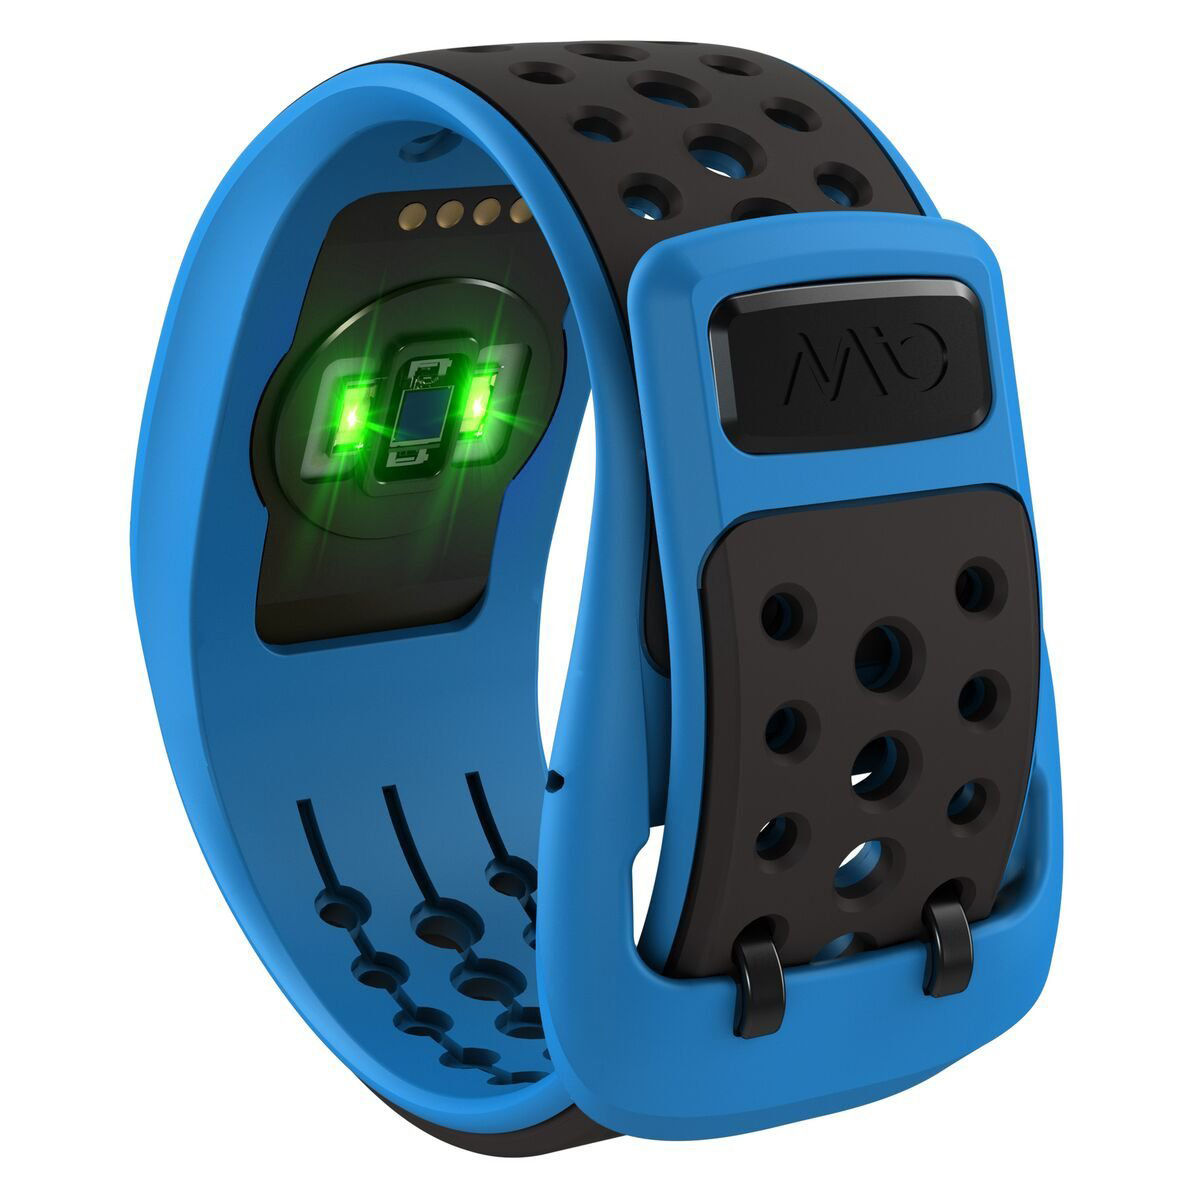 Mio Velo Cycling Heart Rate Monitor Wristband Blue Price Dicebg within The Elegant  cycling heart rate monitor pertaining to House